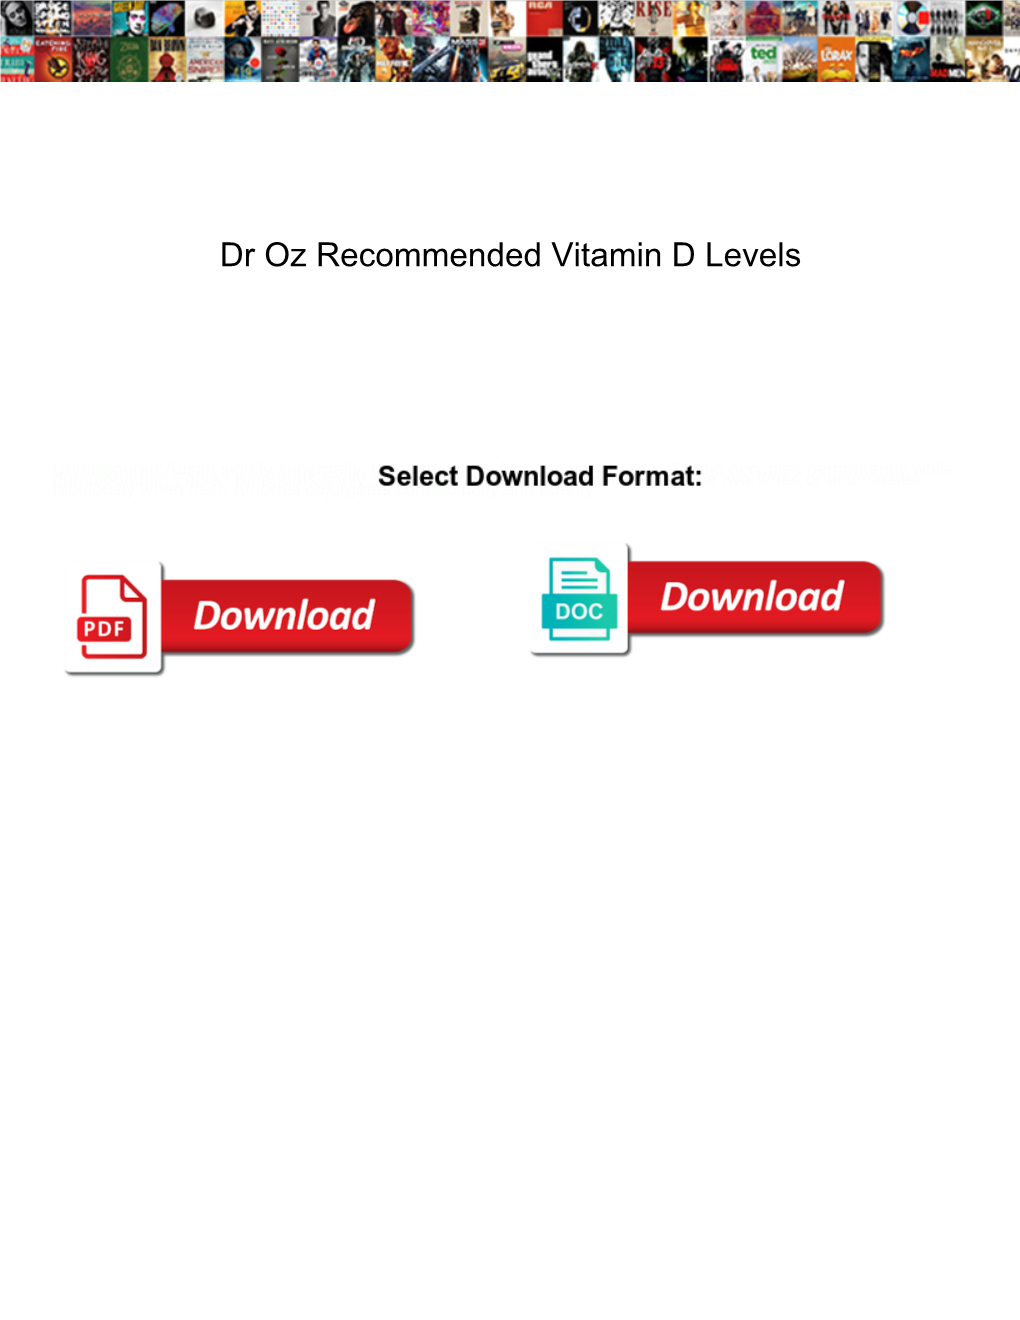 Dr Oz Recommended Vitamin D Levels